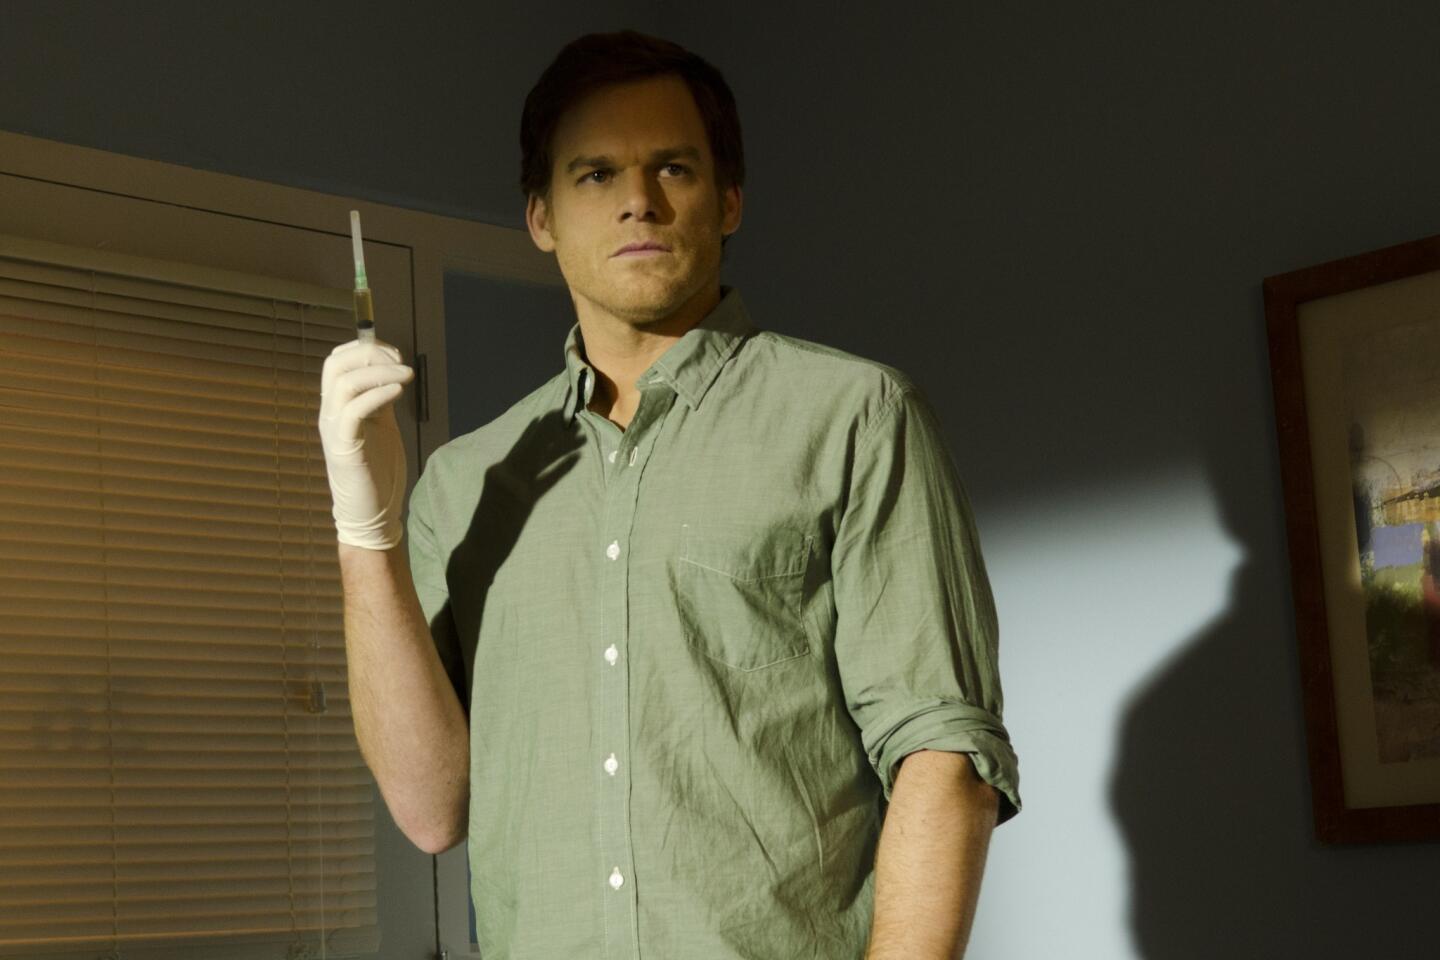 Michael C. Hall's five-year streak of nominations for best actor in a drama series for "Dexter" has been broken. The series about a Miami police forensics expert who moonlights as a serial killer is currently airing its final season. Will the TV academy remember him this time next year?